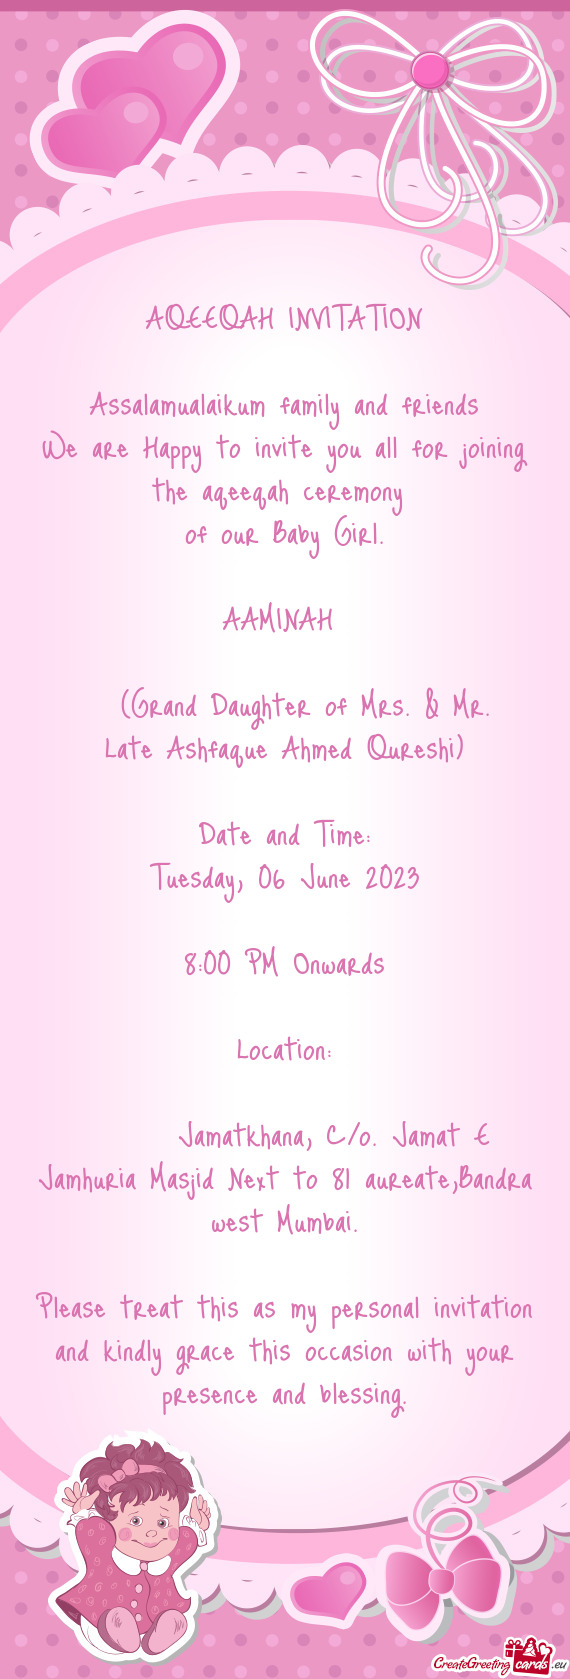 (Grand Daughter of Mrs. & Mr. Late Ashfaque Ahmed Qureshi)